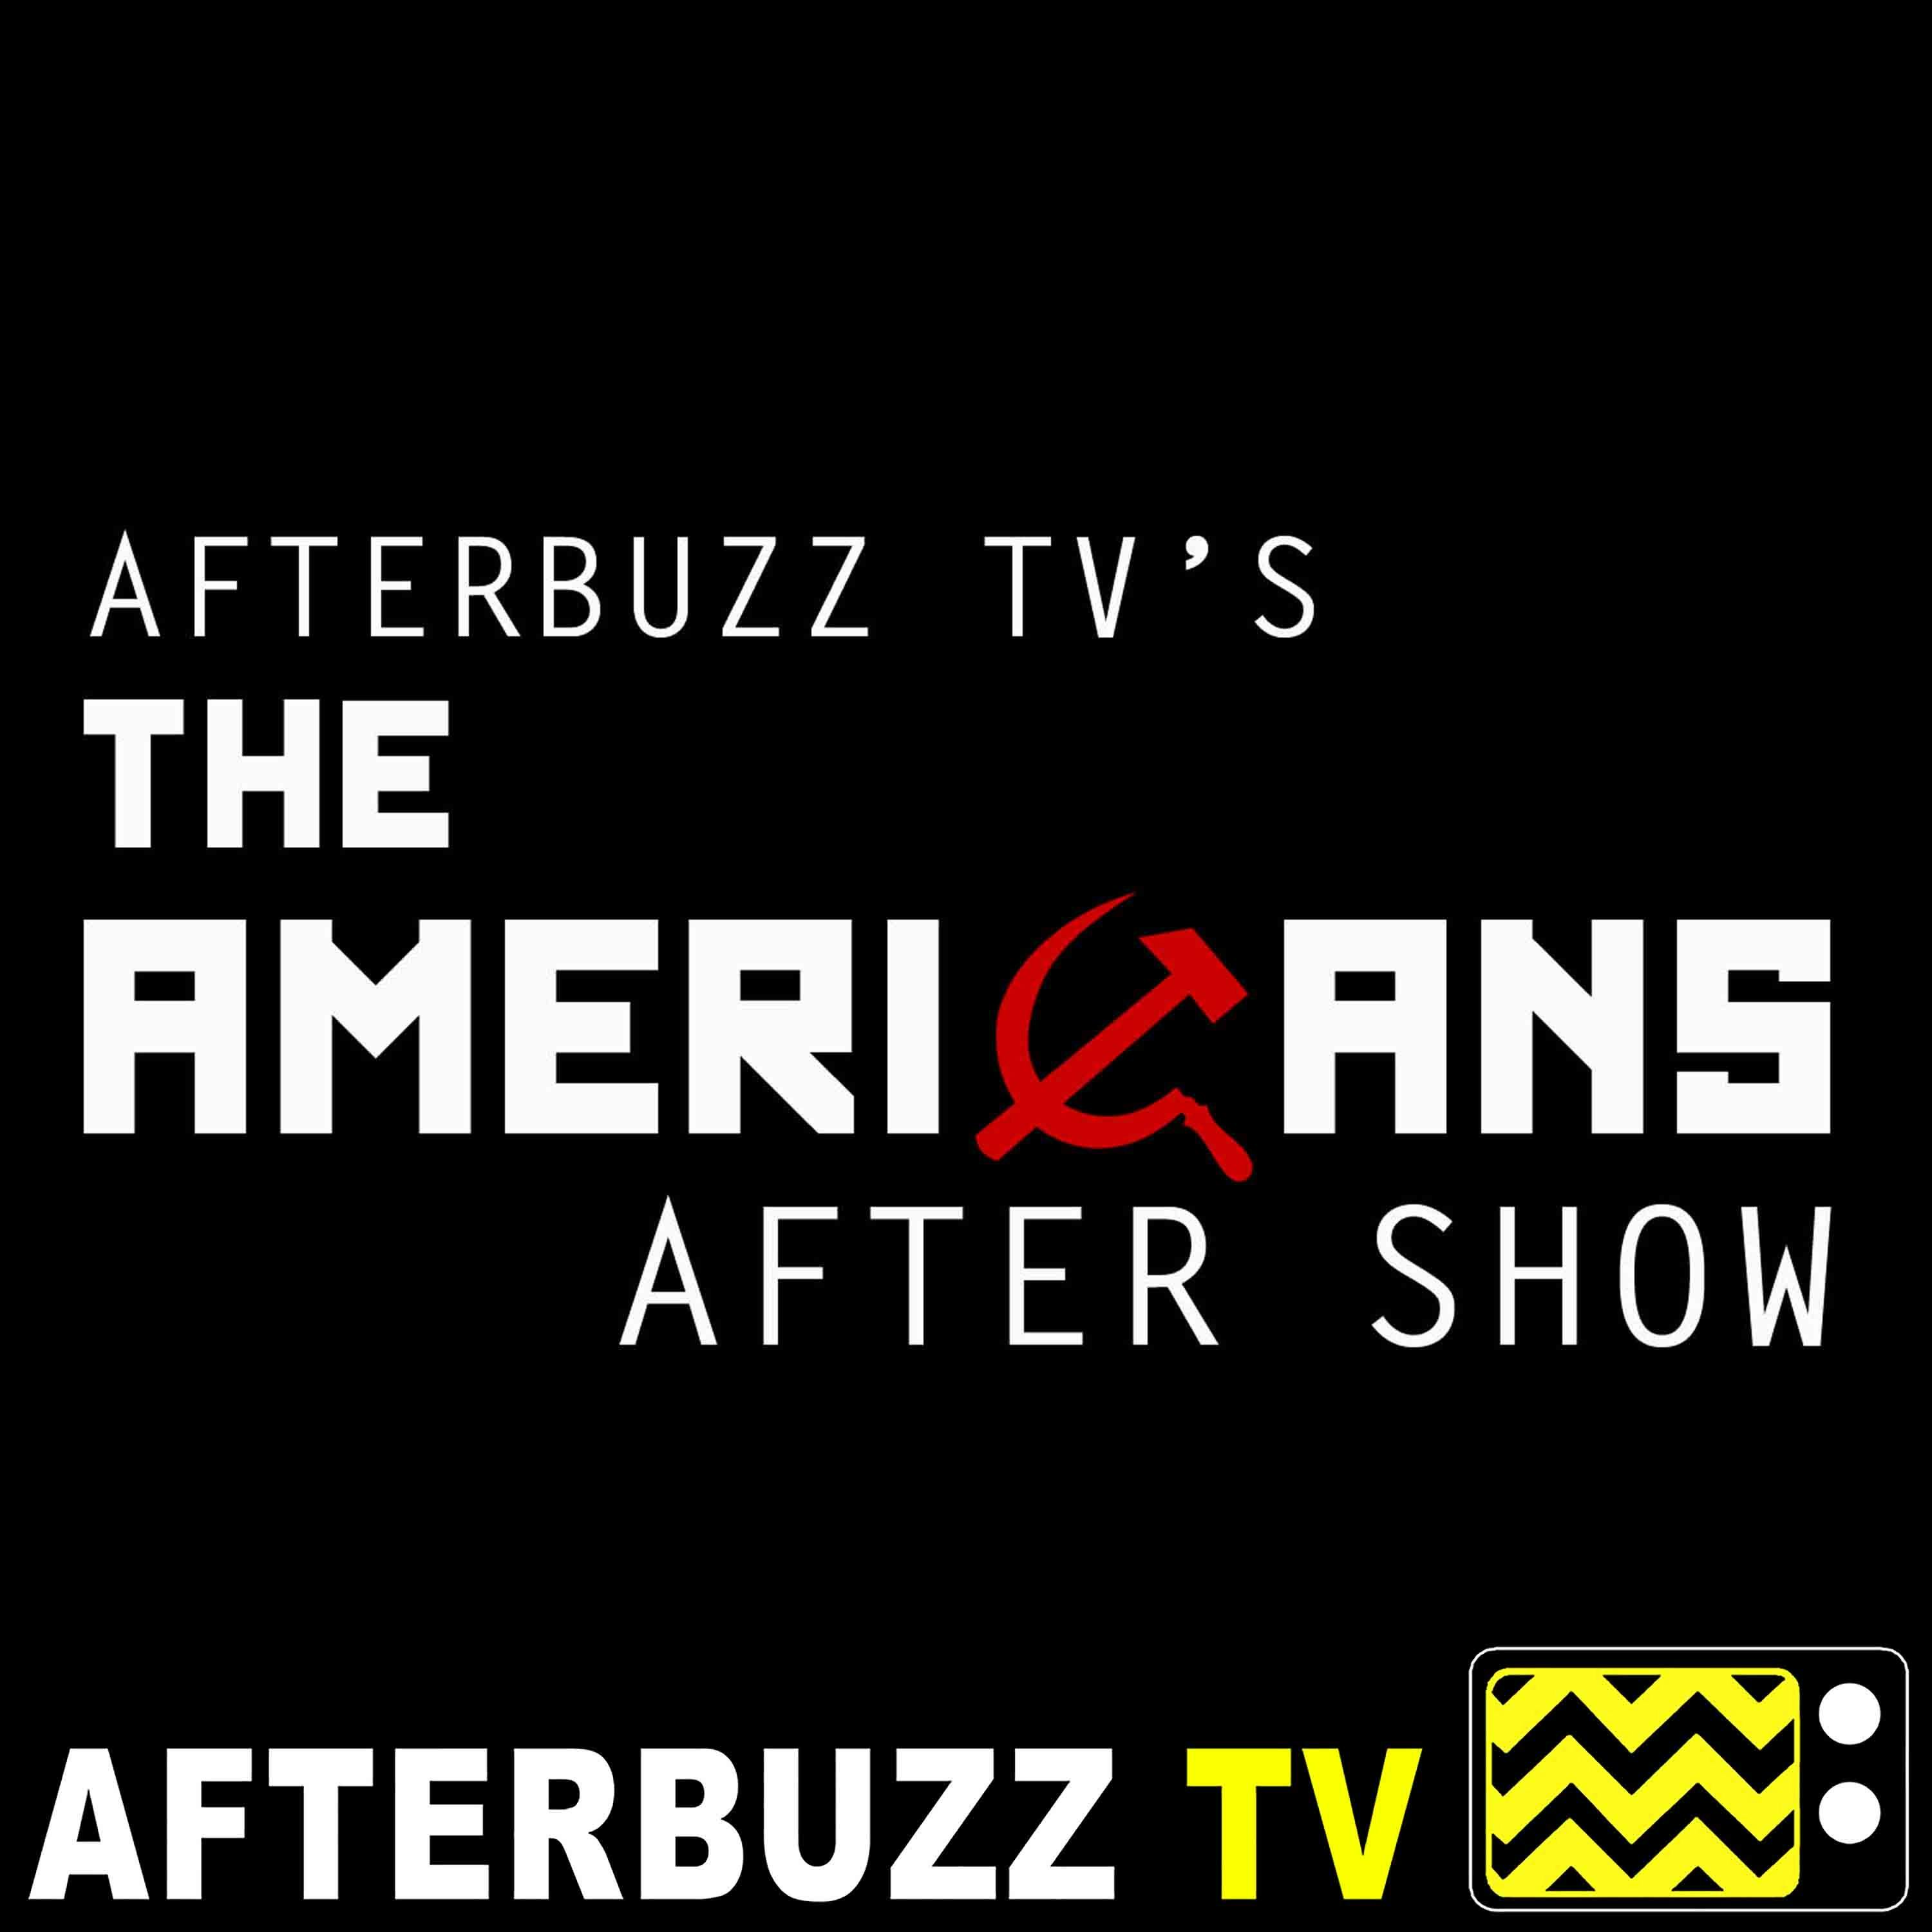 The Americans S:6 | Mr. and Mrs. Teacup; The Great Patriotic War E:4 & E:5 | AfterBuzz TV AfterShow